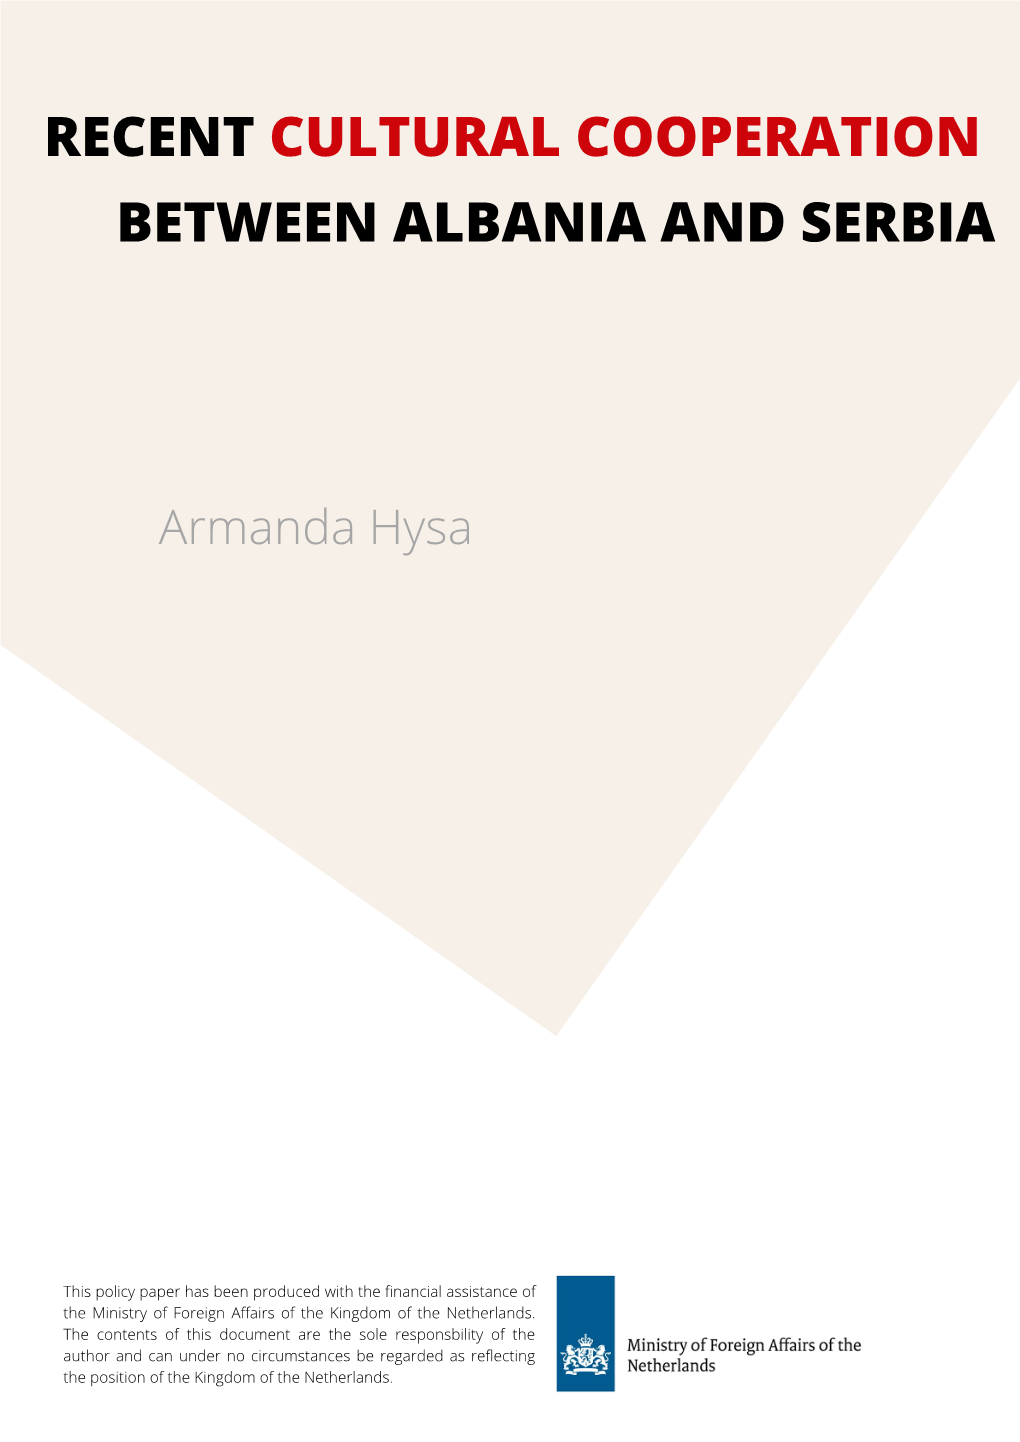 Recent Cultural Cooperation Between Albania and Serbia